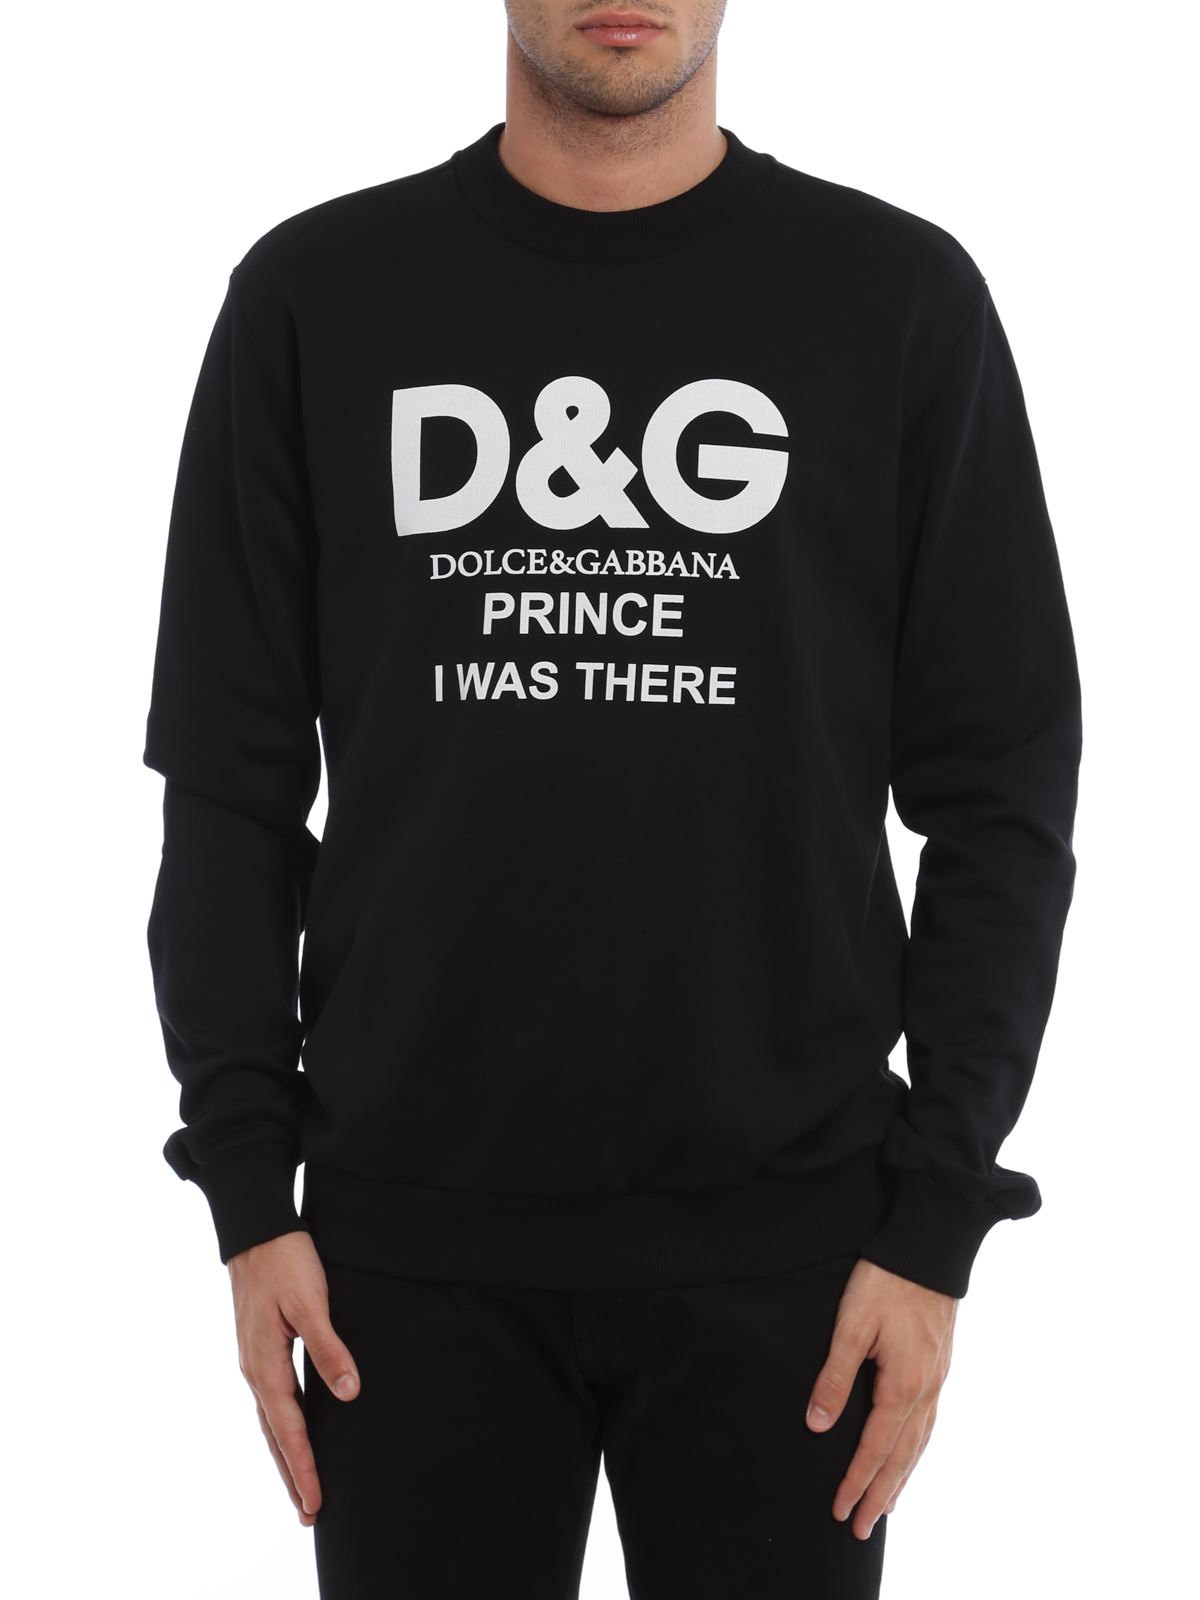 d&g prince i was there